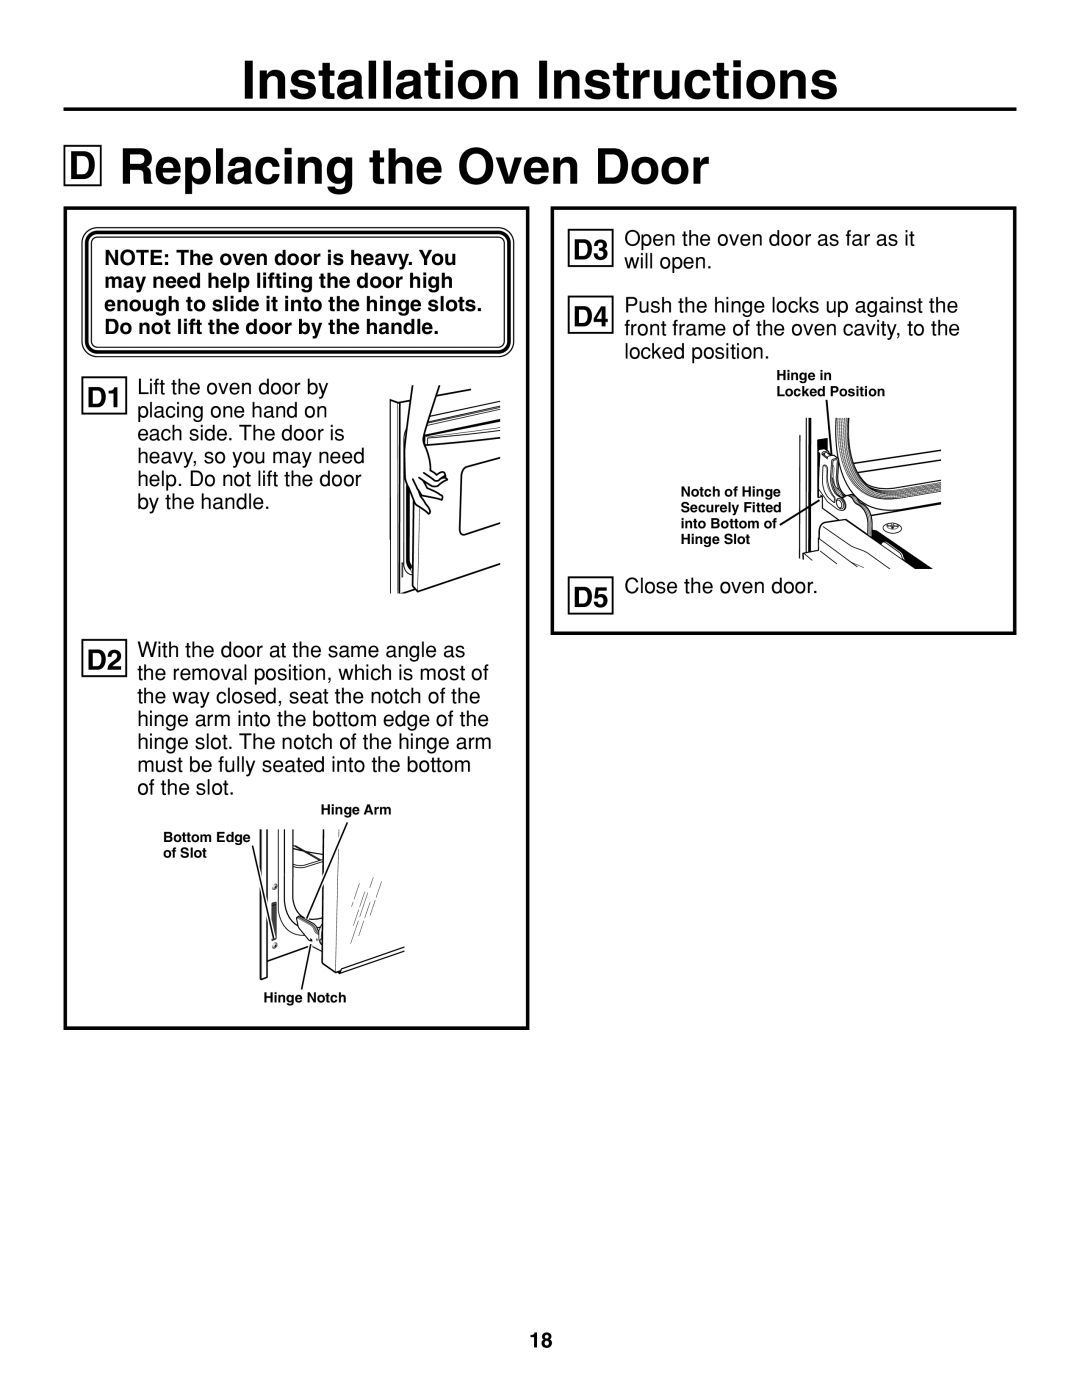 GE r08654v-1 installation instructions Replacing the Oven Door, Installation Instructions 